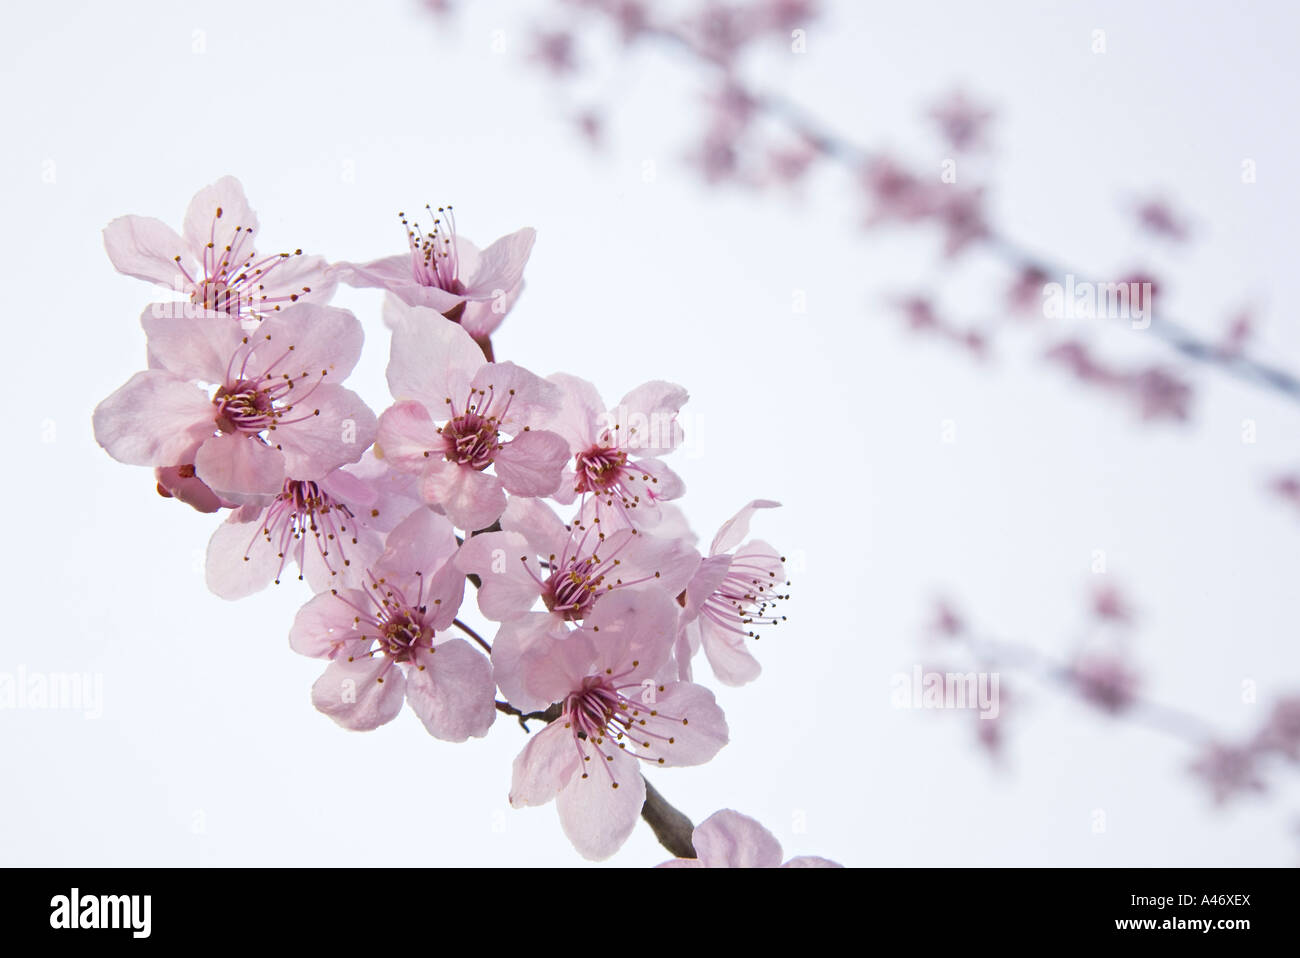 Japanese plum, twigs and blossoms Stock Photo